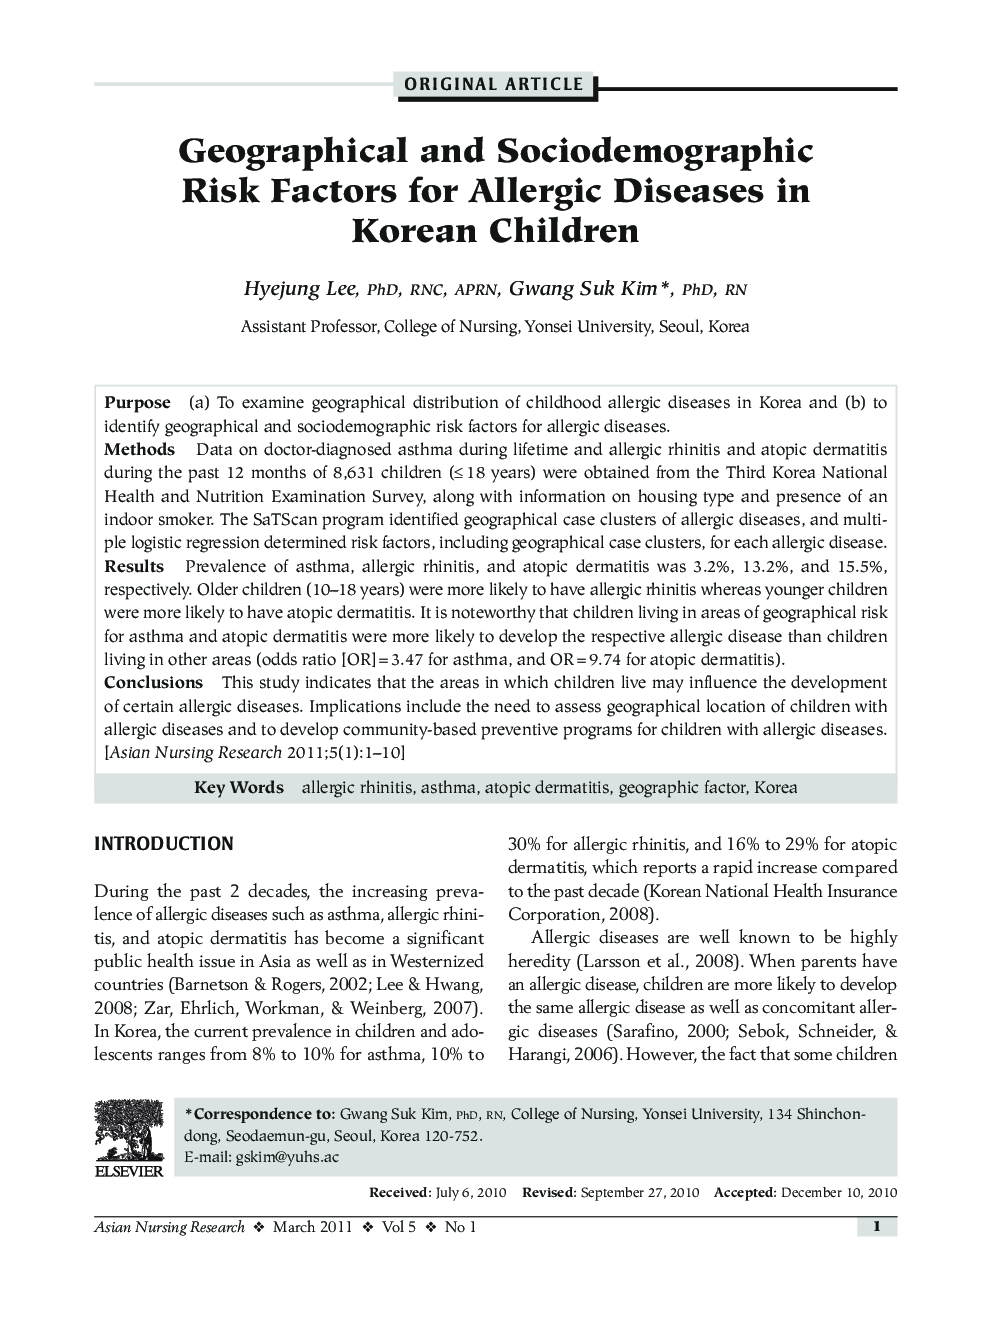 Geographical and Sociodemographic Risk Factors for Allergic Diseases in Korean Children